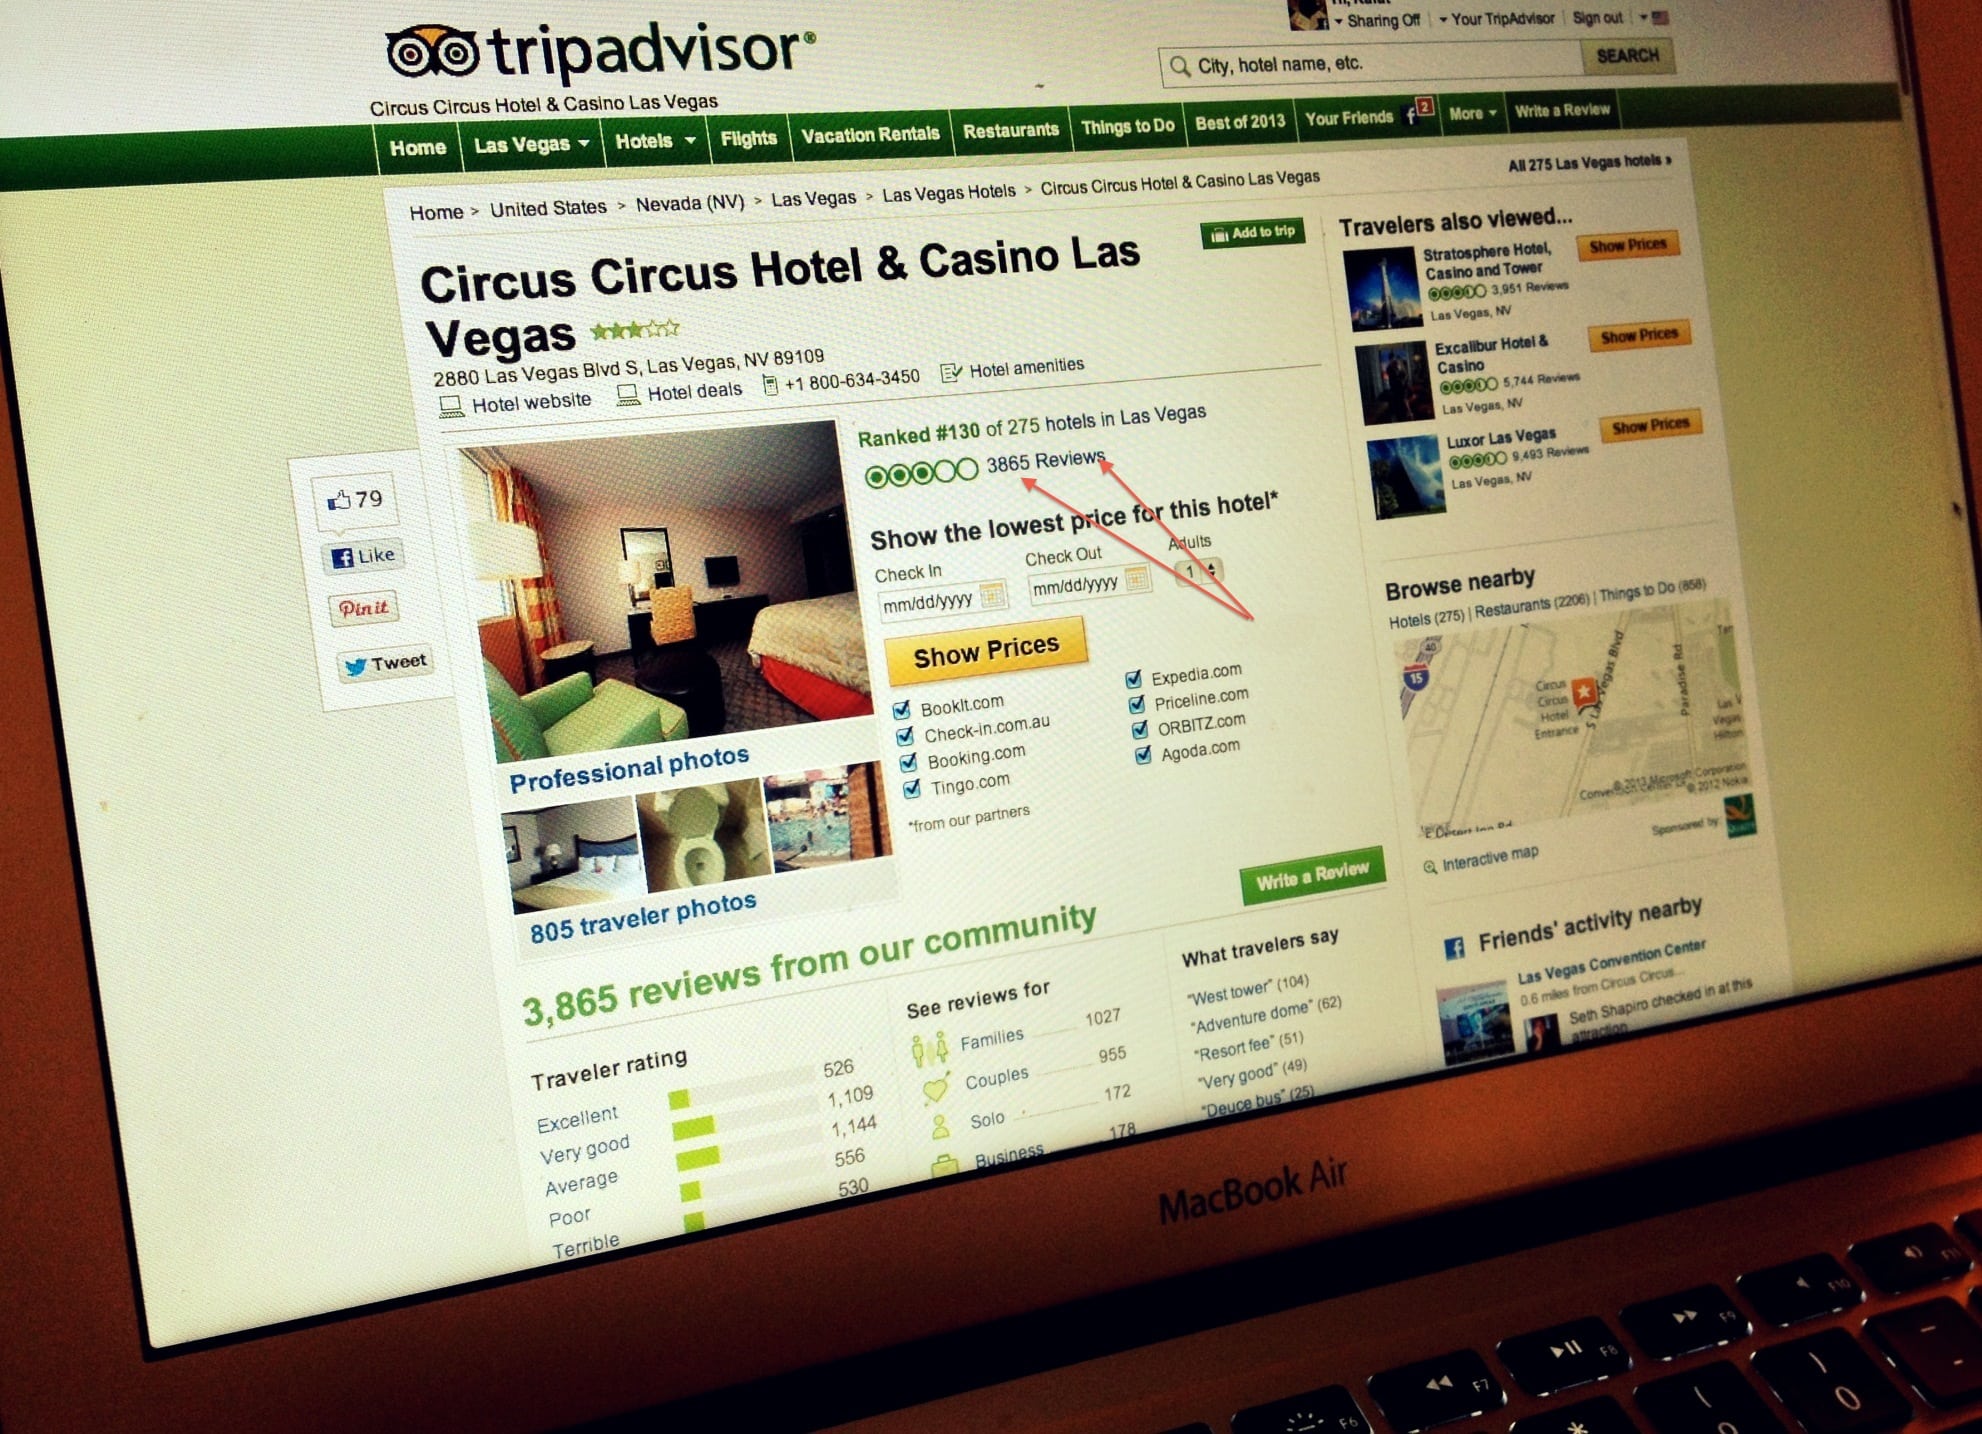 TripAdvisor boasts 3,865 user reviews for the Circus Circus Hotel & Casino in Las Vegas, and that's a lot more to go on than a hotel with just a dozen or so reviews.